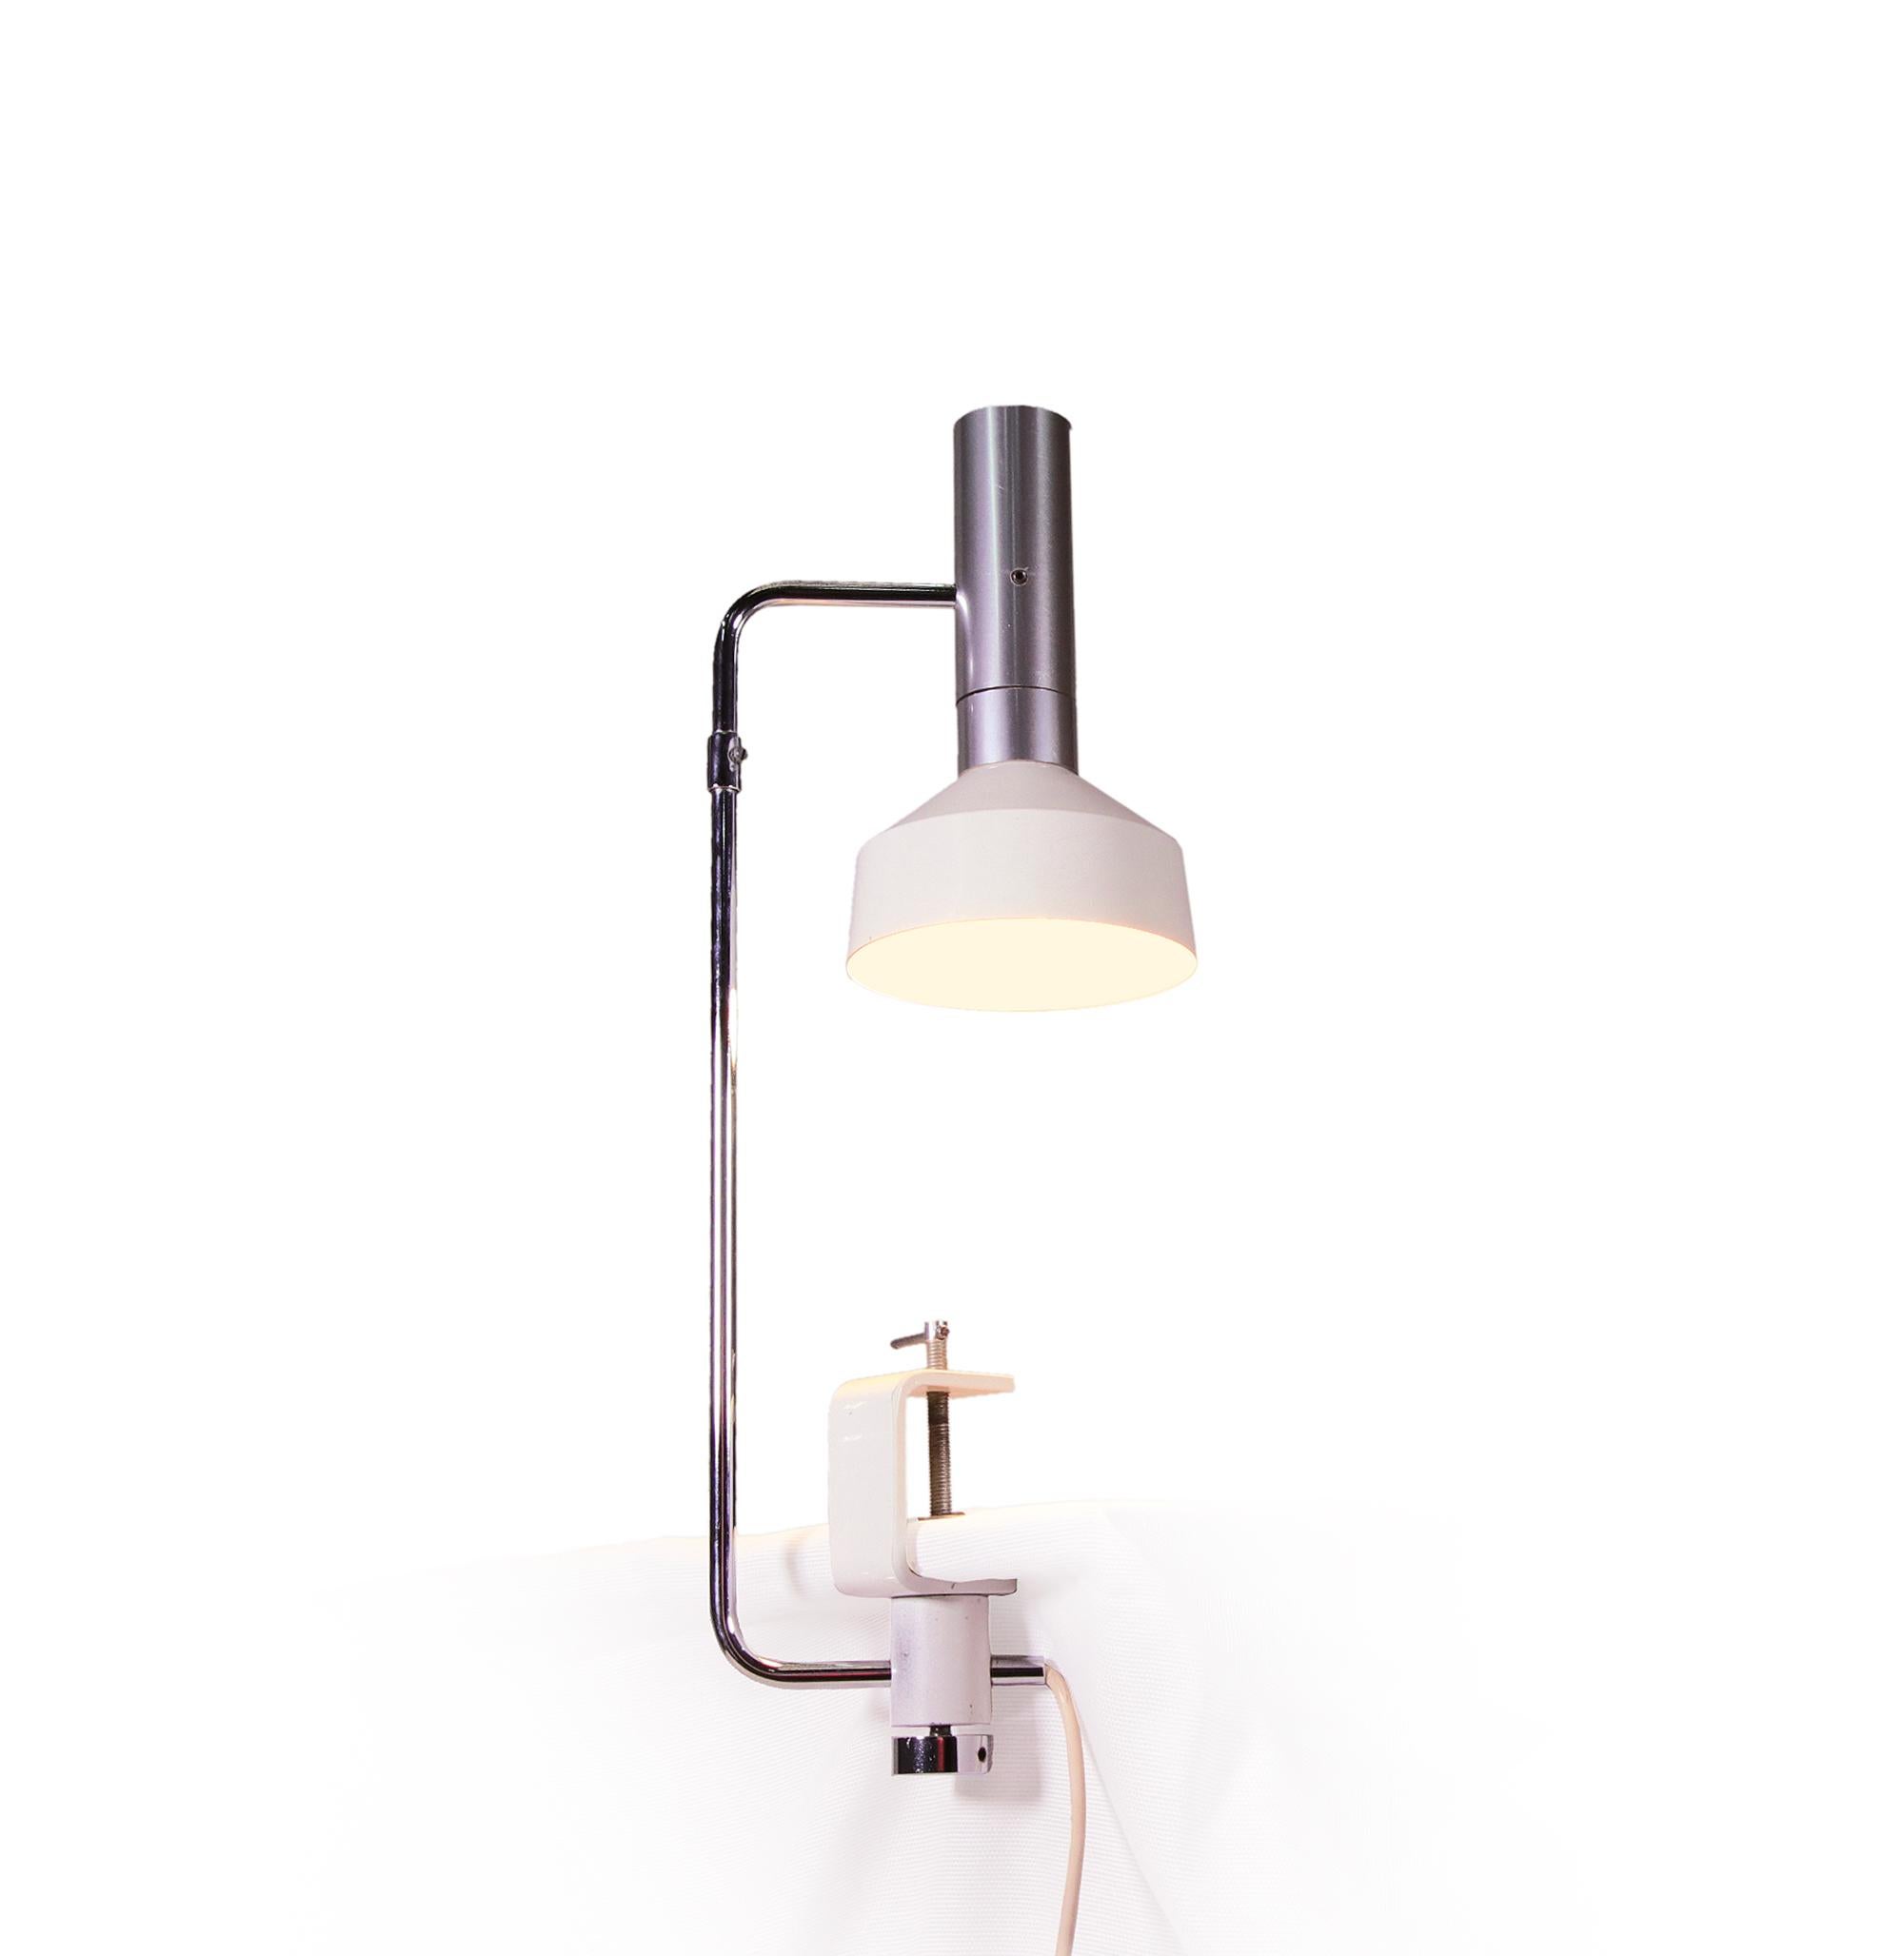 Mid-20th Century Minilux Desk Clamp Lamp by Rico Baltensweiler, Swiss Made, 1960s